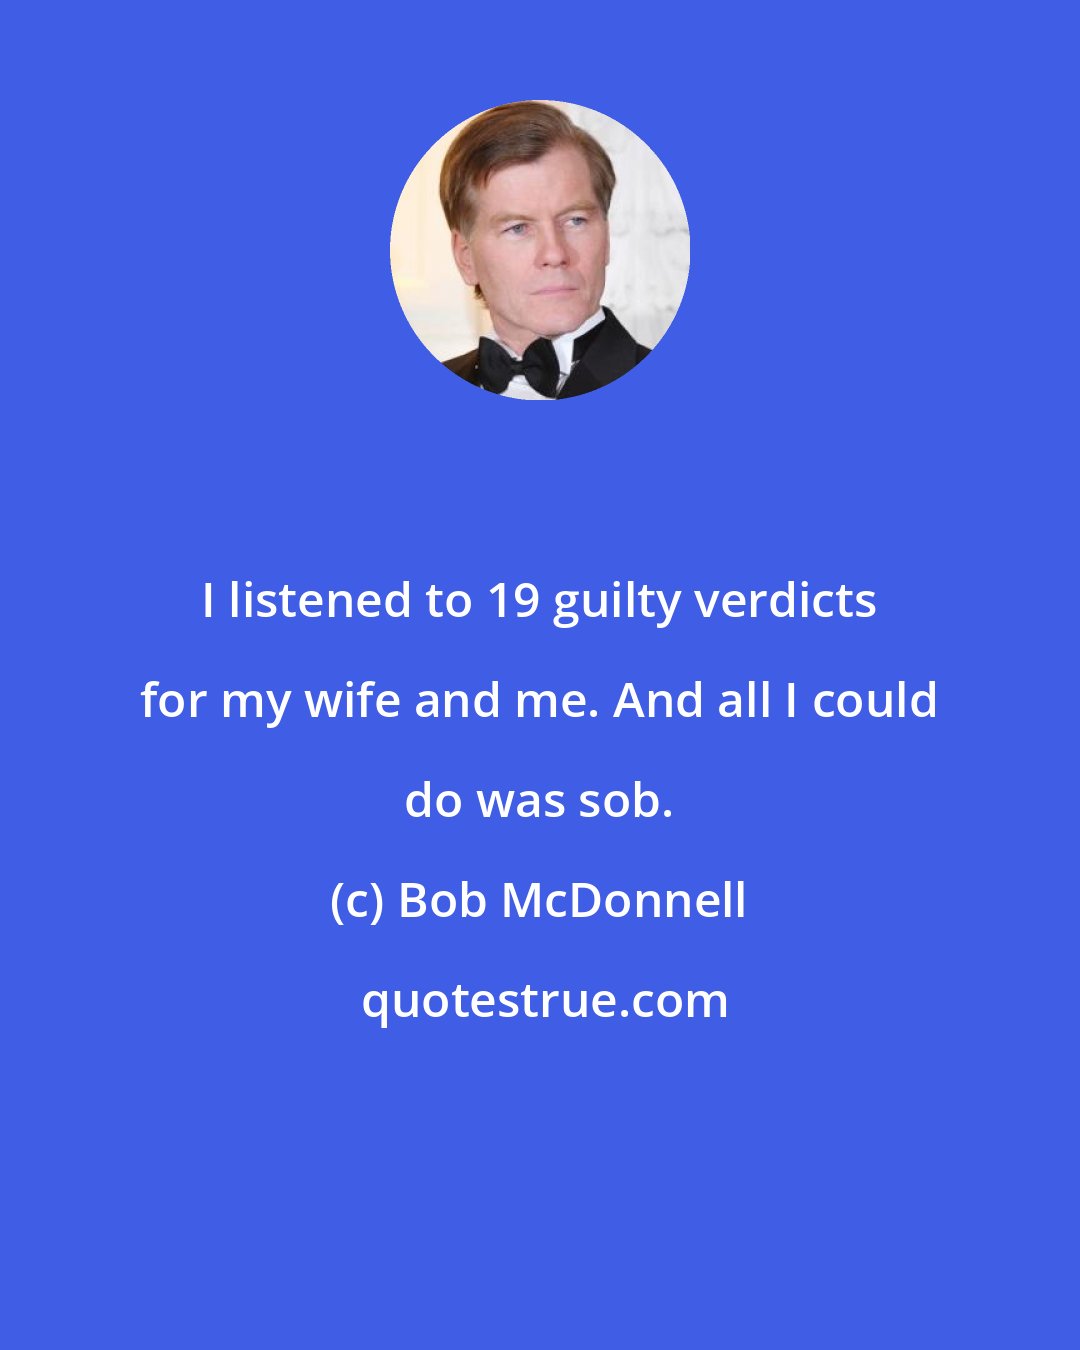 Bob McDonnell: I listened to 19 guilty verdicts for my wife and me. And all I could do was sob.